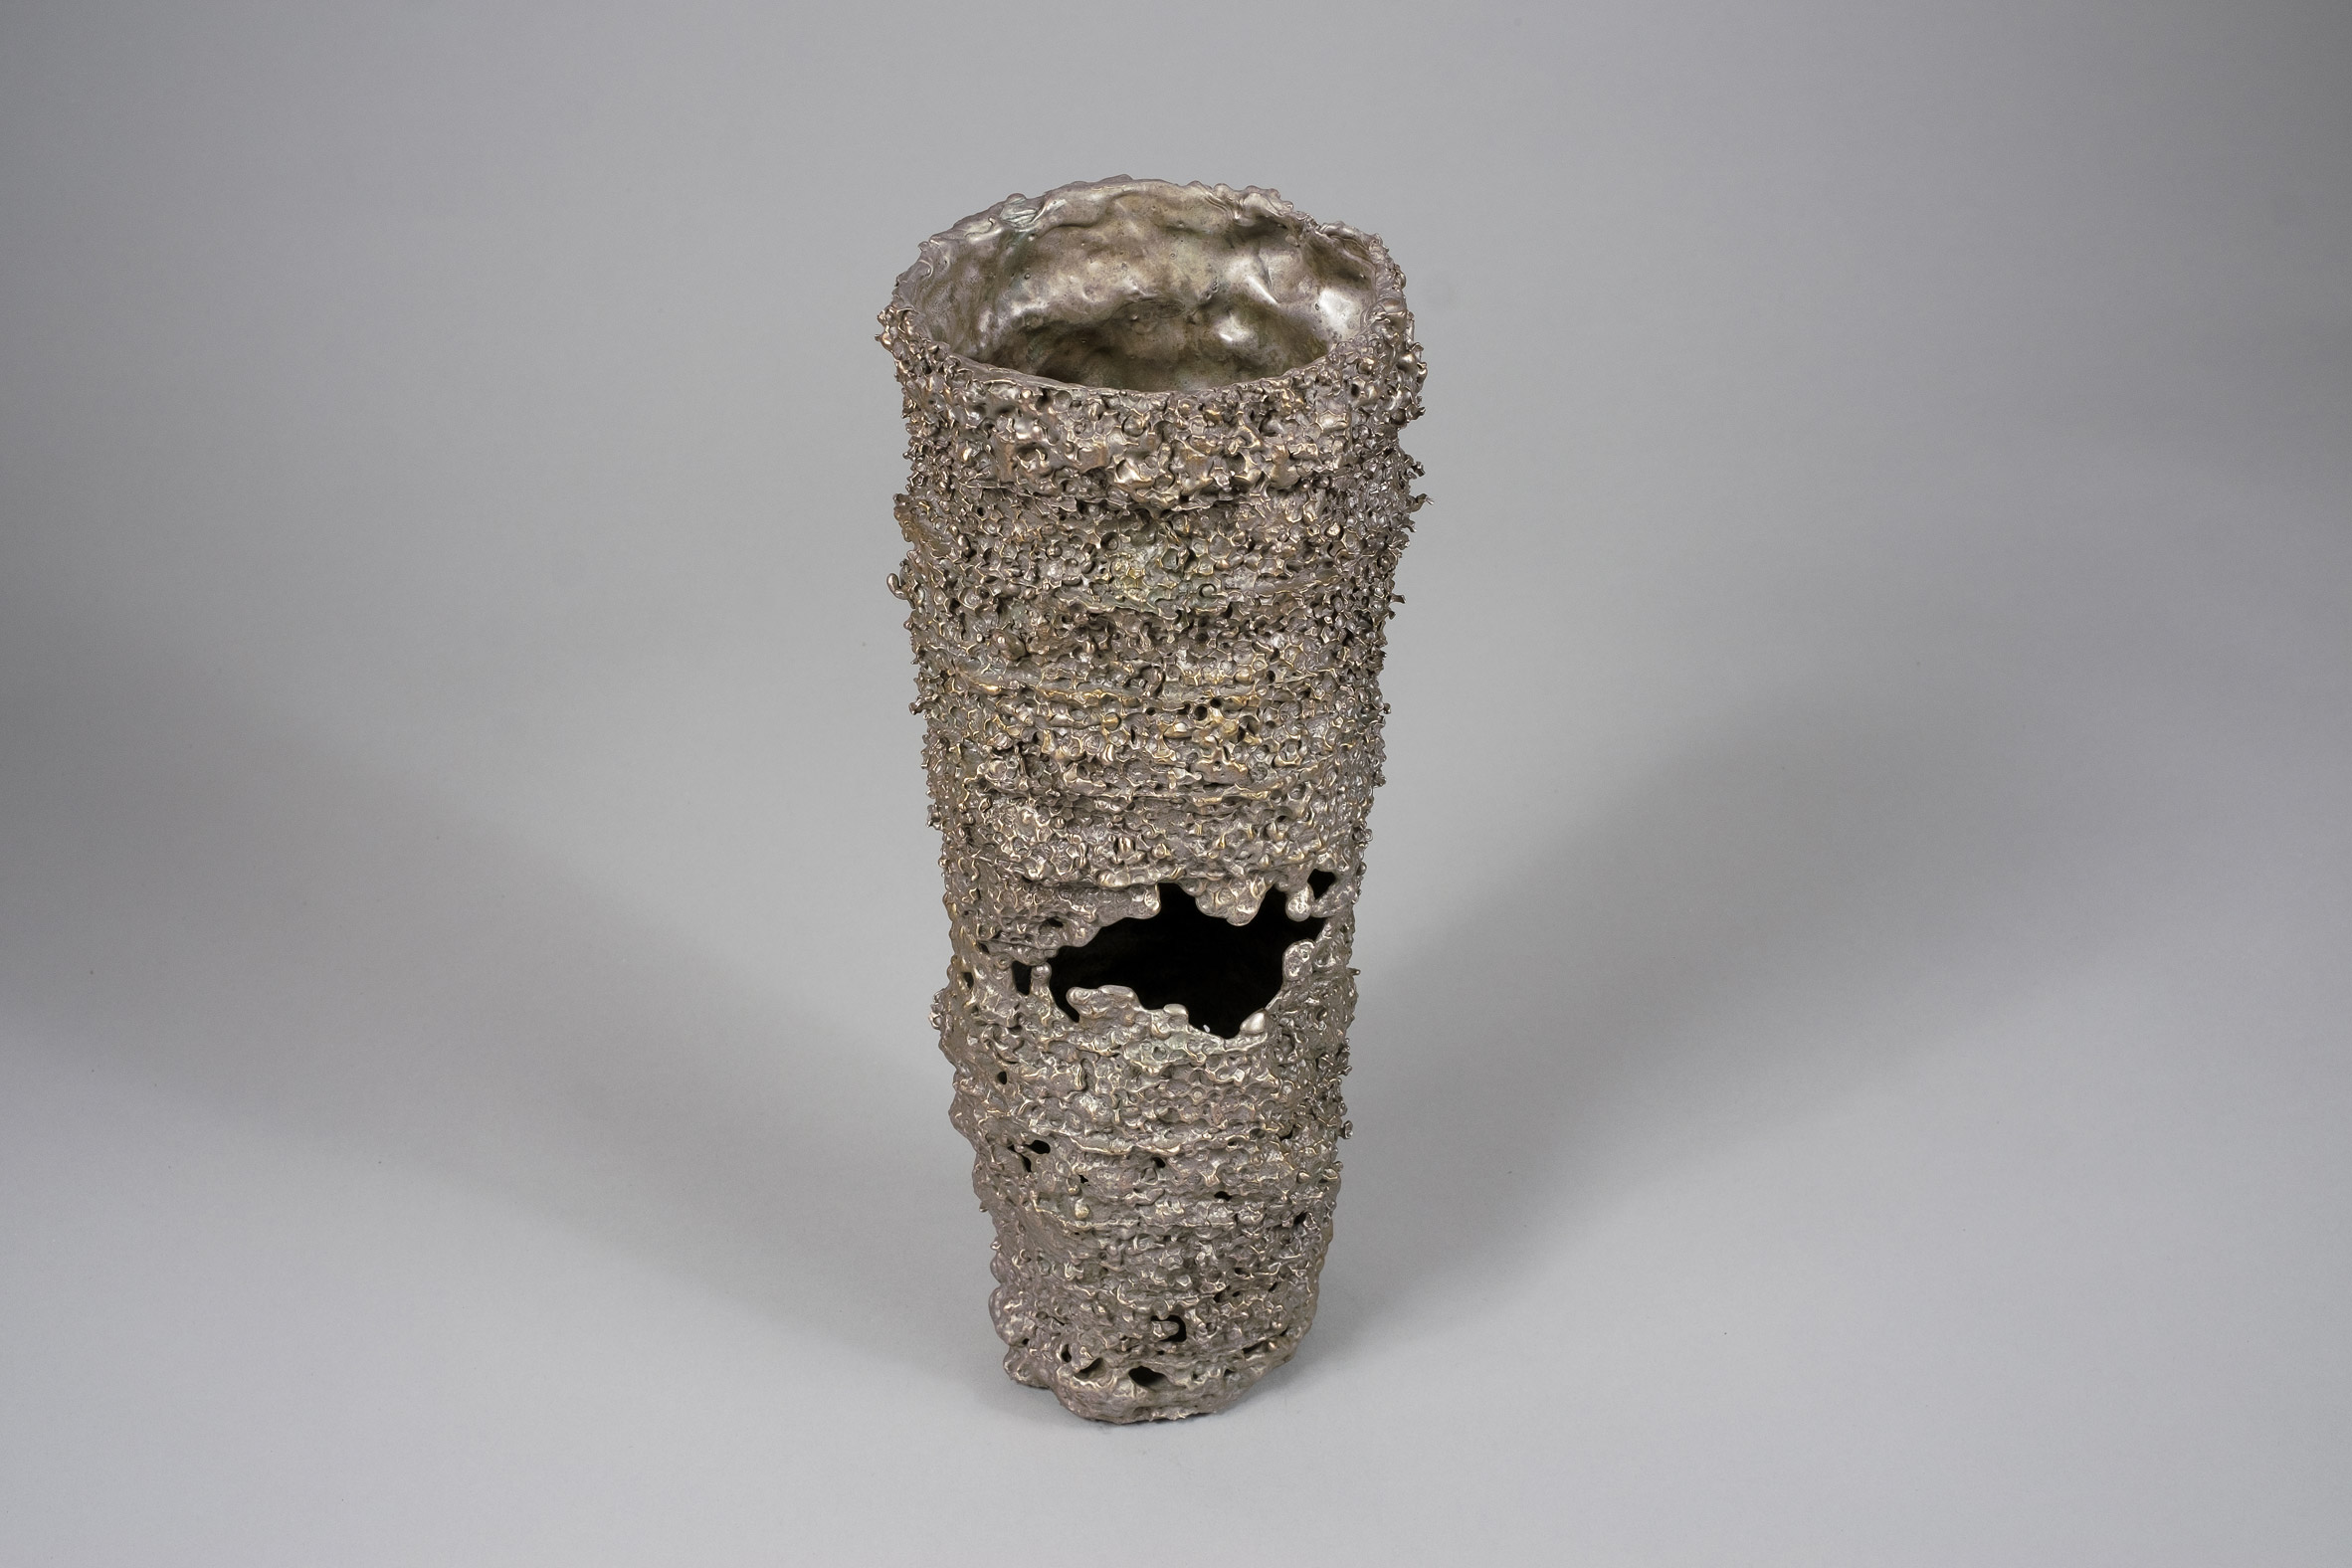 Kris Lamba casts bronze vessels in the form of dissolved polystyrene